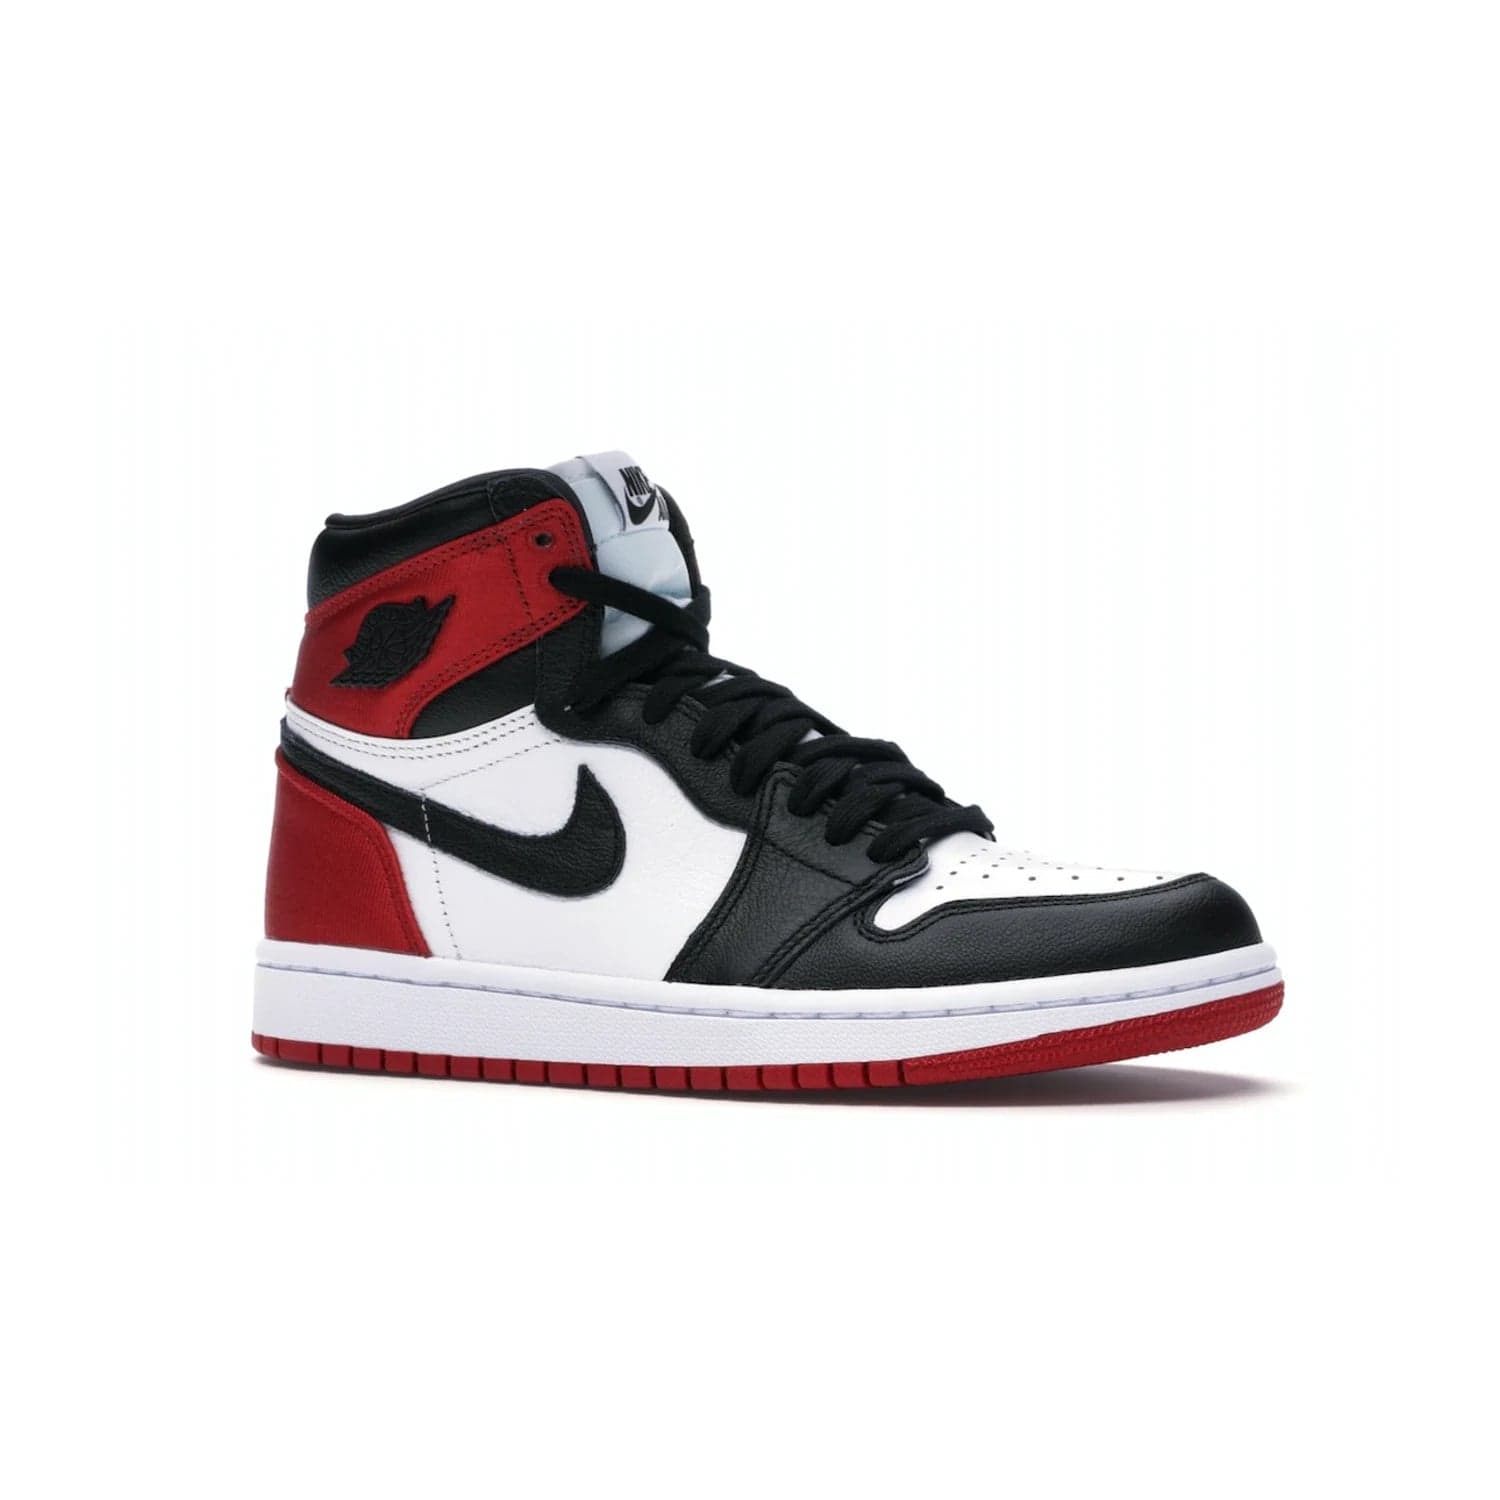 Jordan 1 Retro High Satin Black Toe (Women's) - Image 3 - Only at www.BallersClubKickz.com - Luxurious take on the timeless Air Jordan 1. Features a mix of black leather and satin materials with subtle University Red accents. Elevated look with metal Wings logo on the heel. Released in August 2019.